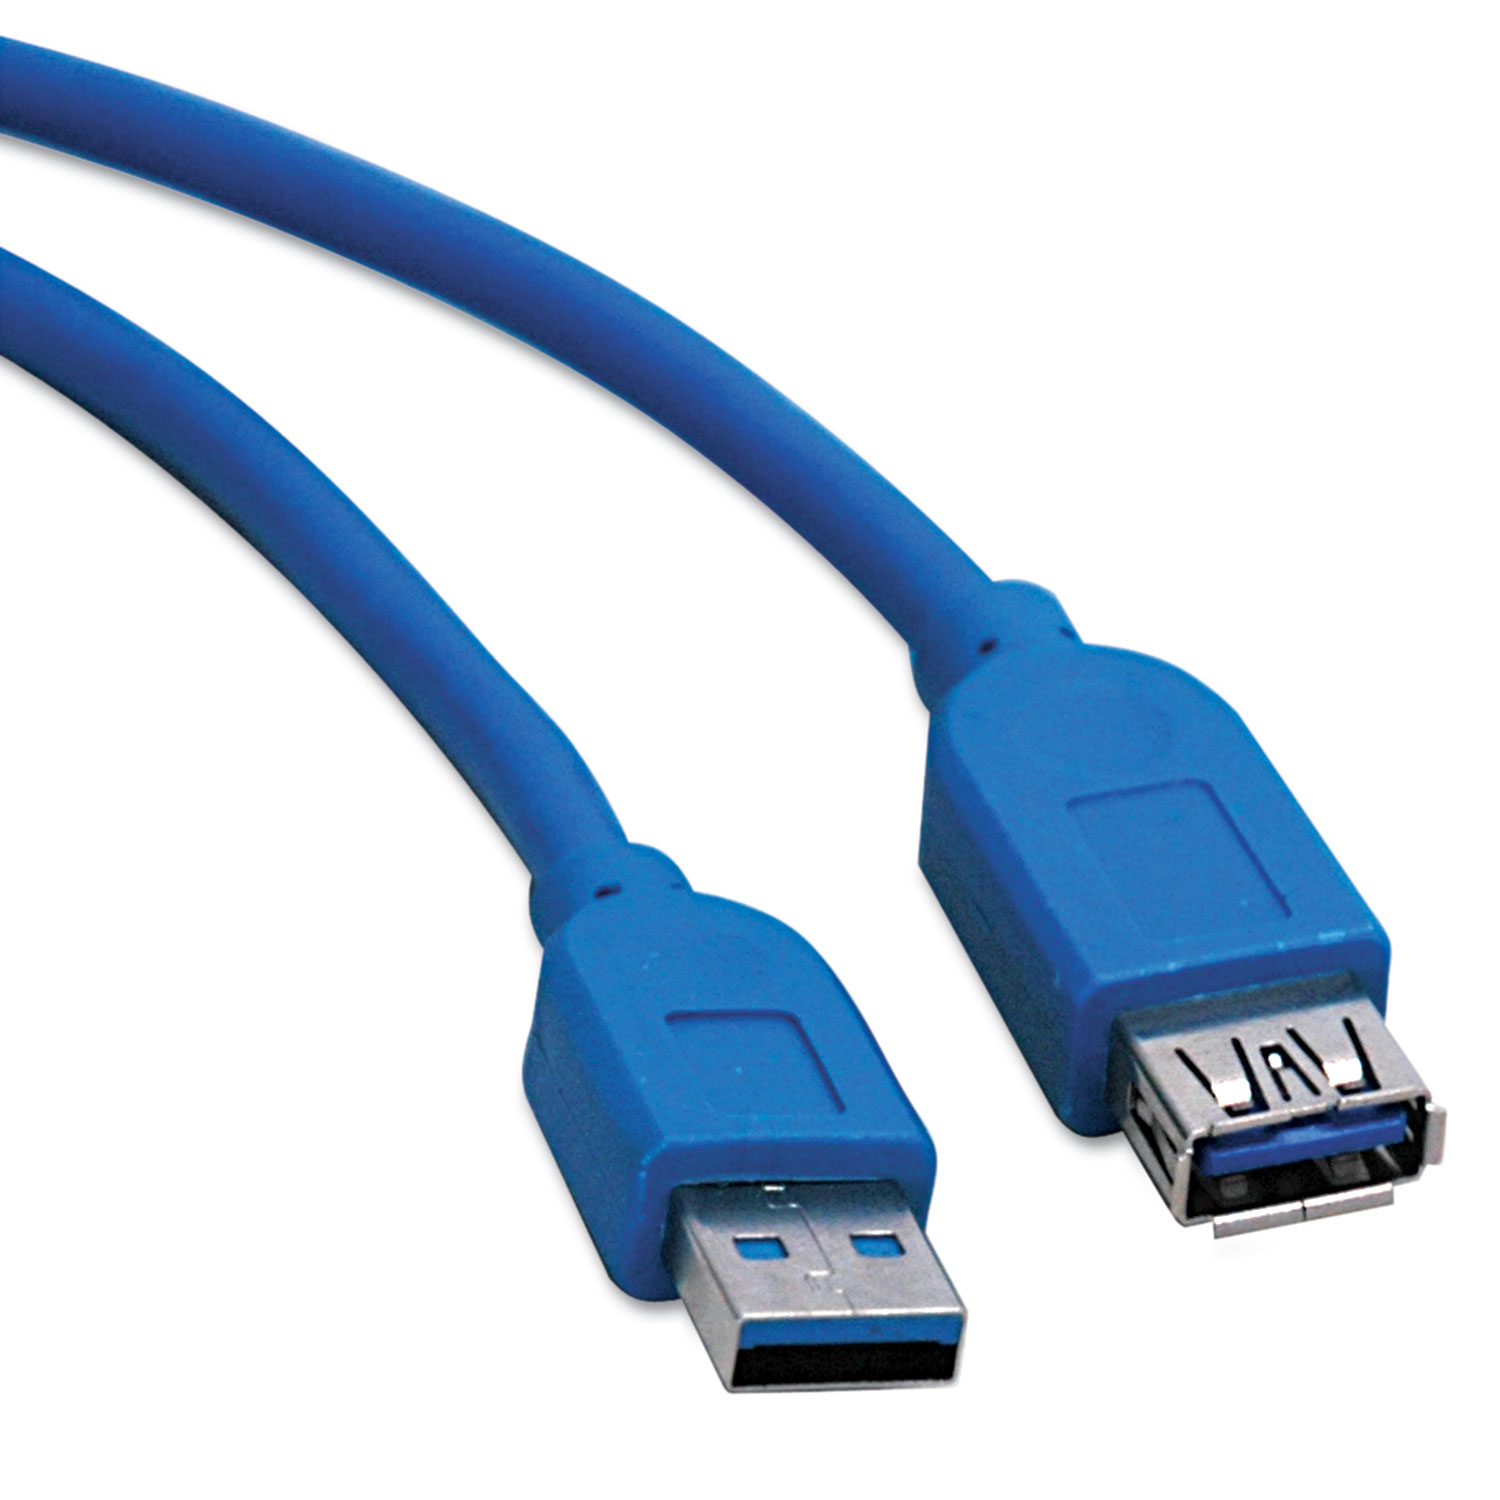 USB 3.0 Extension Cable, 6 ft, Blue